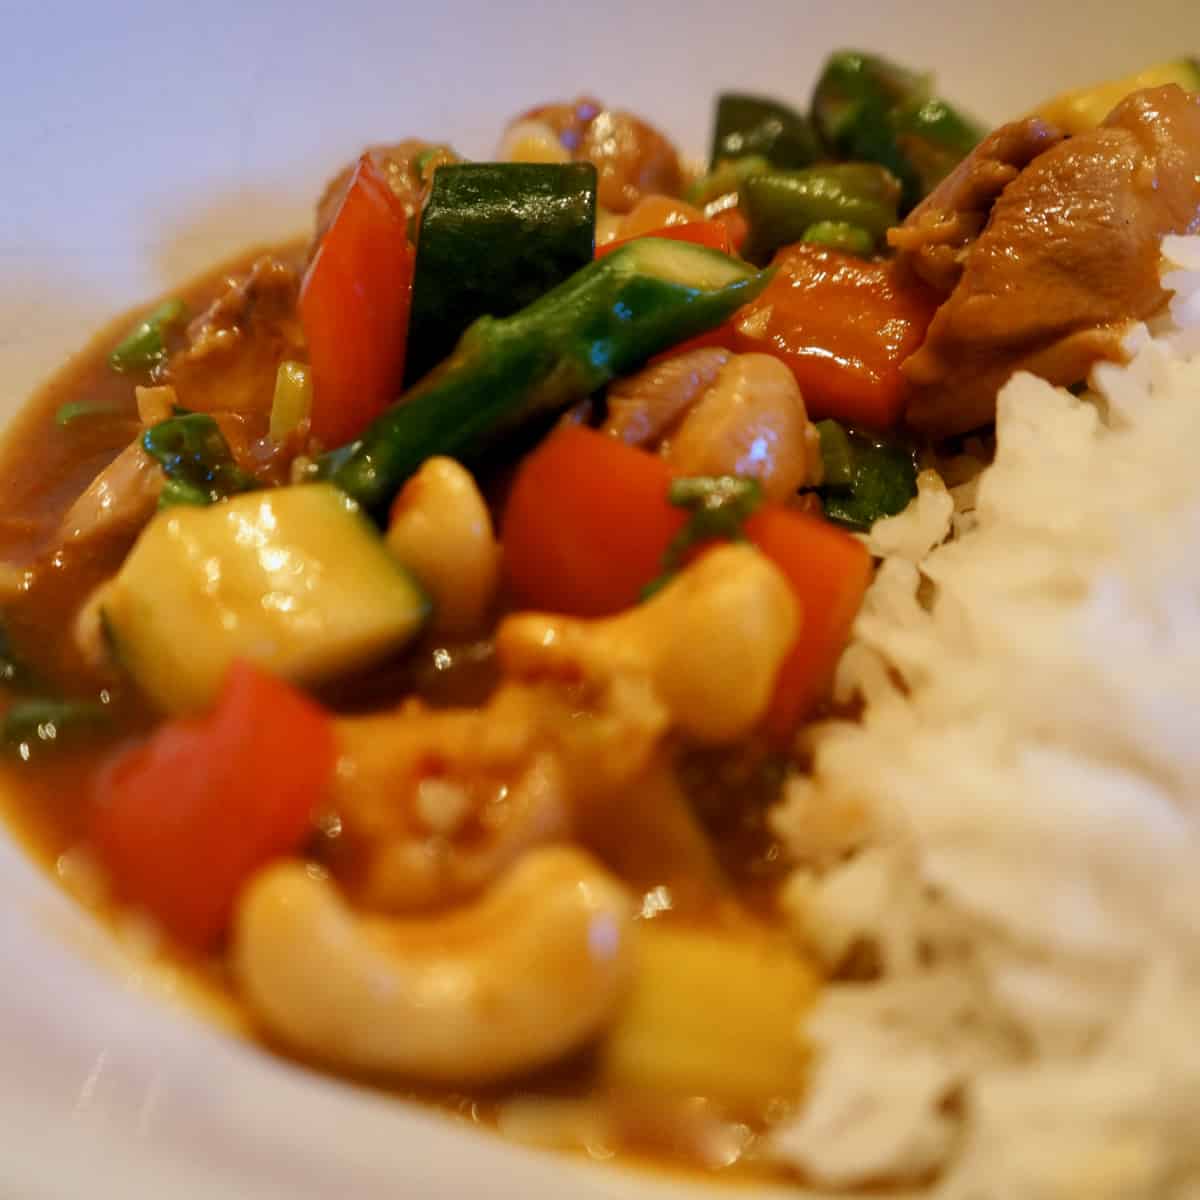  A plate of Spicy Cashew Chicken with Asparagus.